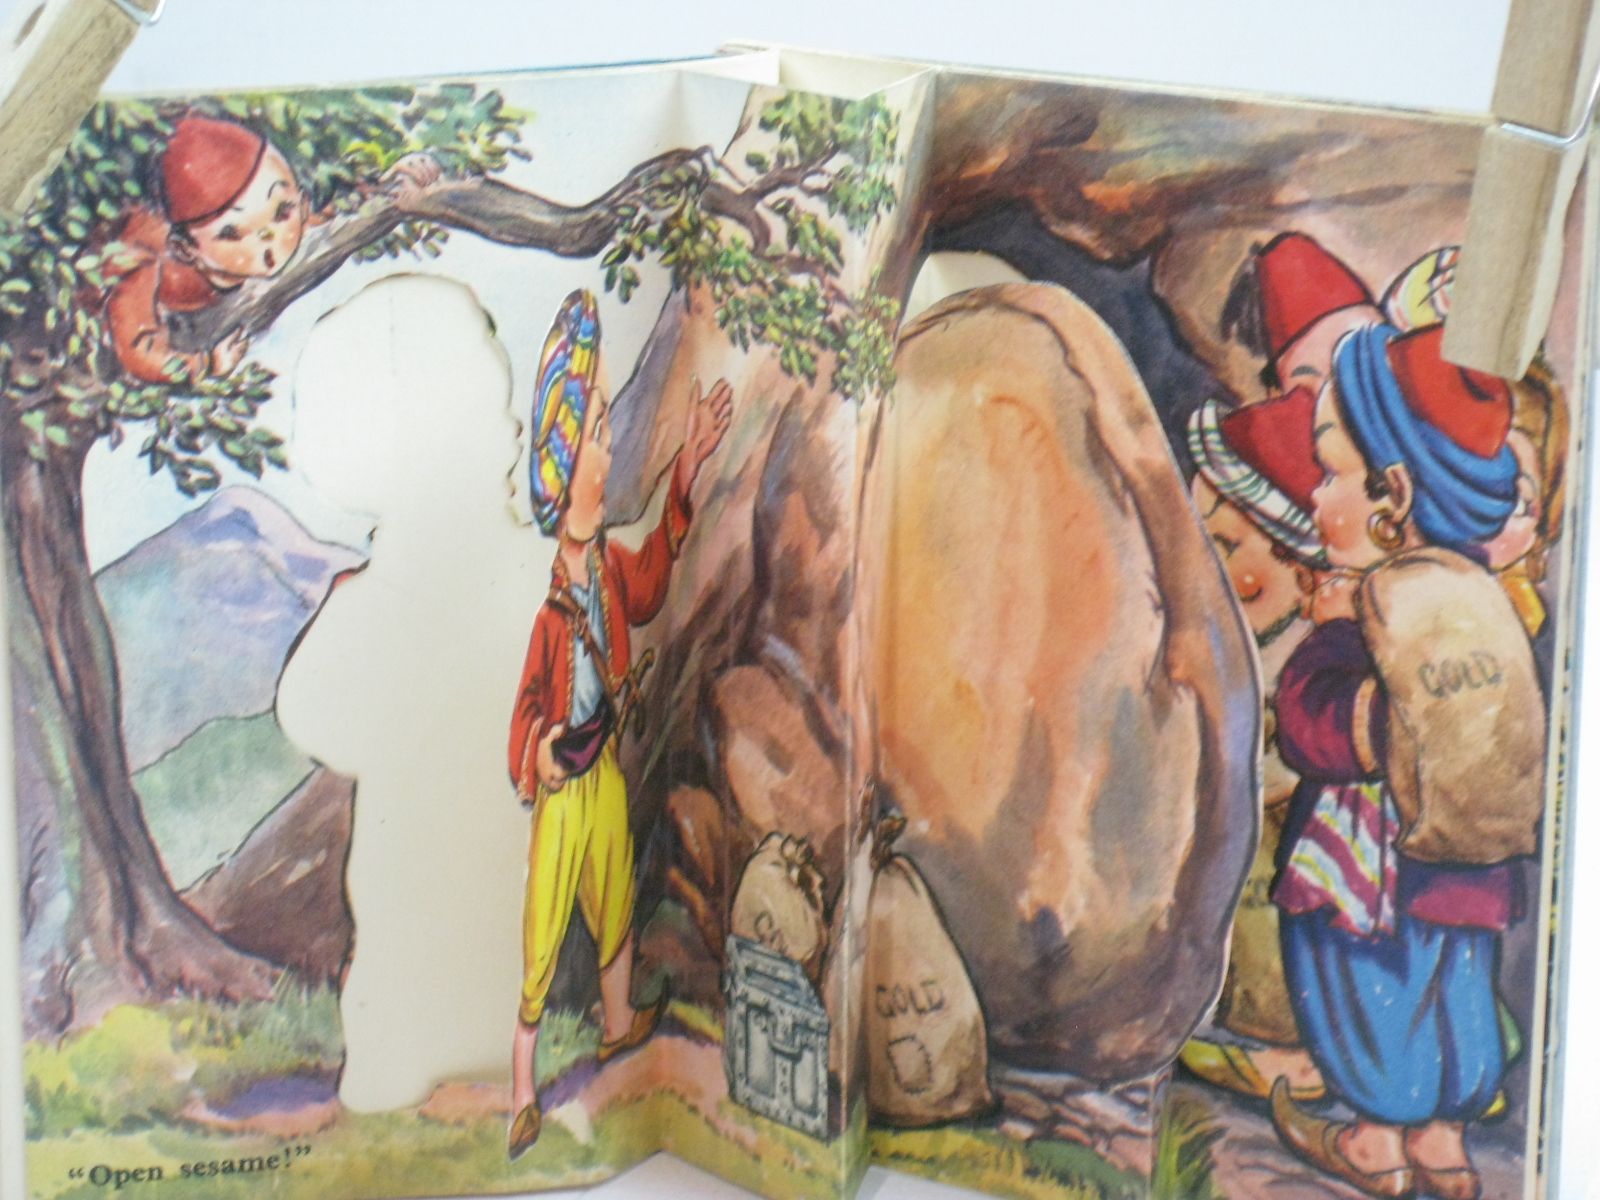 Photo of ALI BABA AND THE FORTY THIEVES illustrated by Dinah,  published by Raphael Tuck & Sons (STOCK CODE: 1405922)  for sale by Stella & Rose's Books